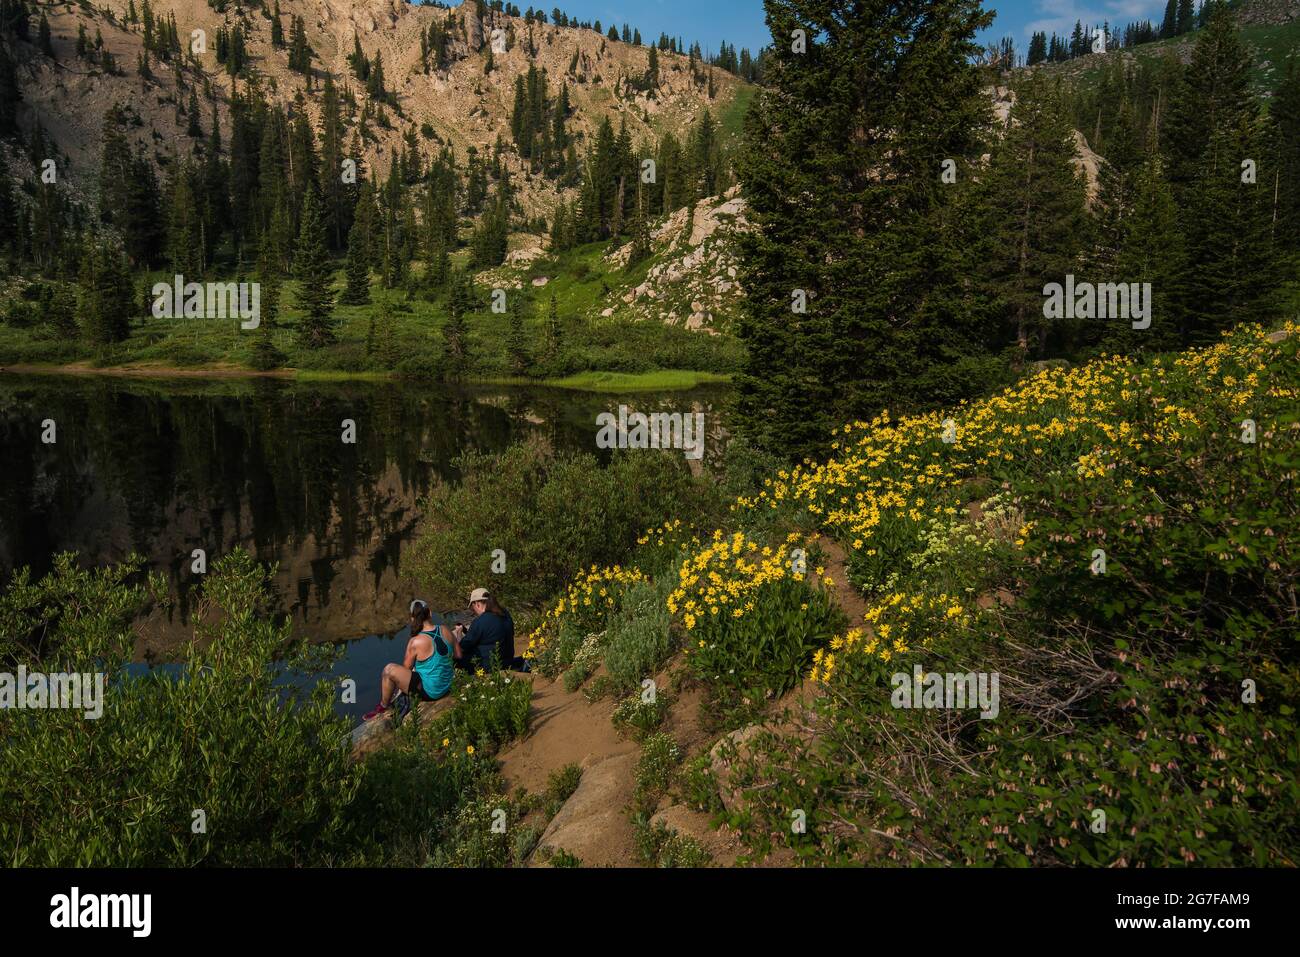 Hikers resting near a high mountain lake, checking their cell phones.  Young people cant enjoy nature without their technology. Stock Photo